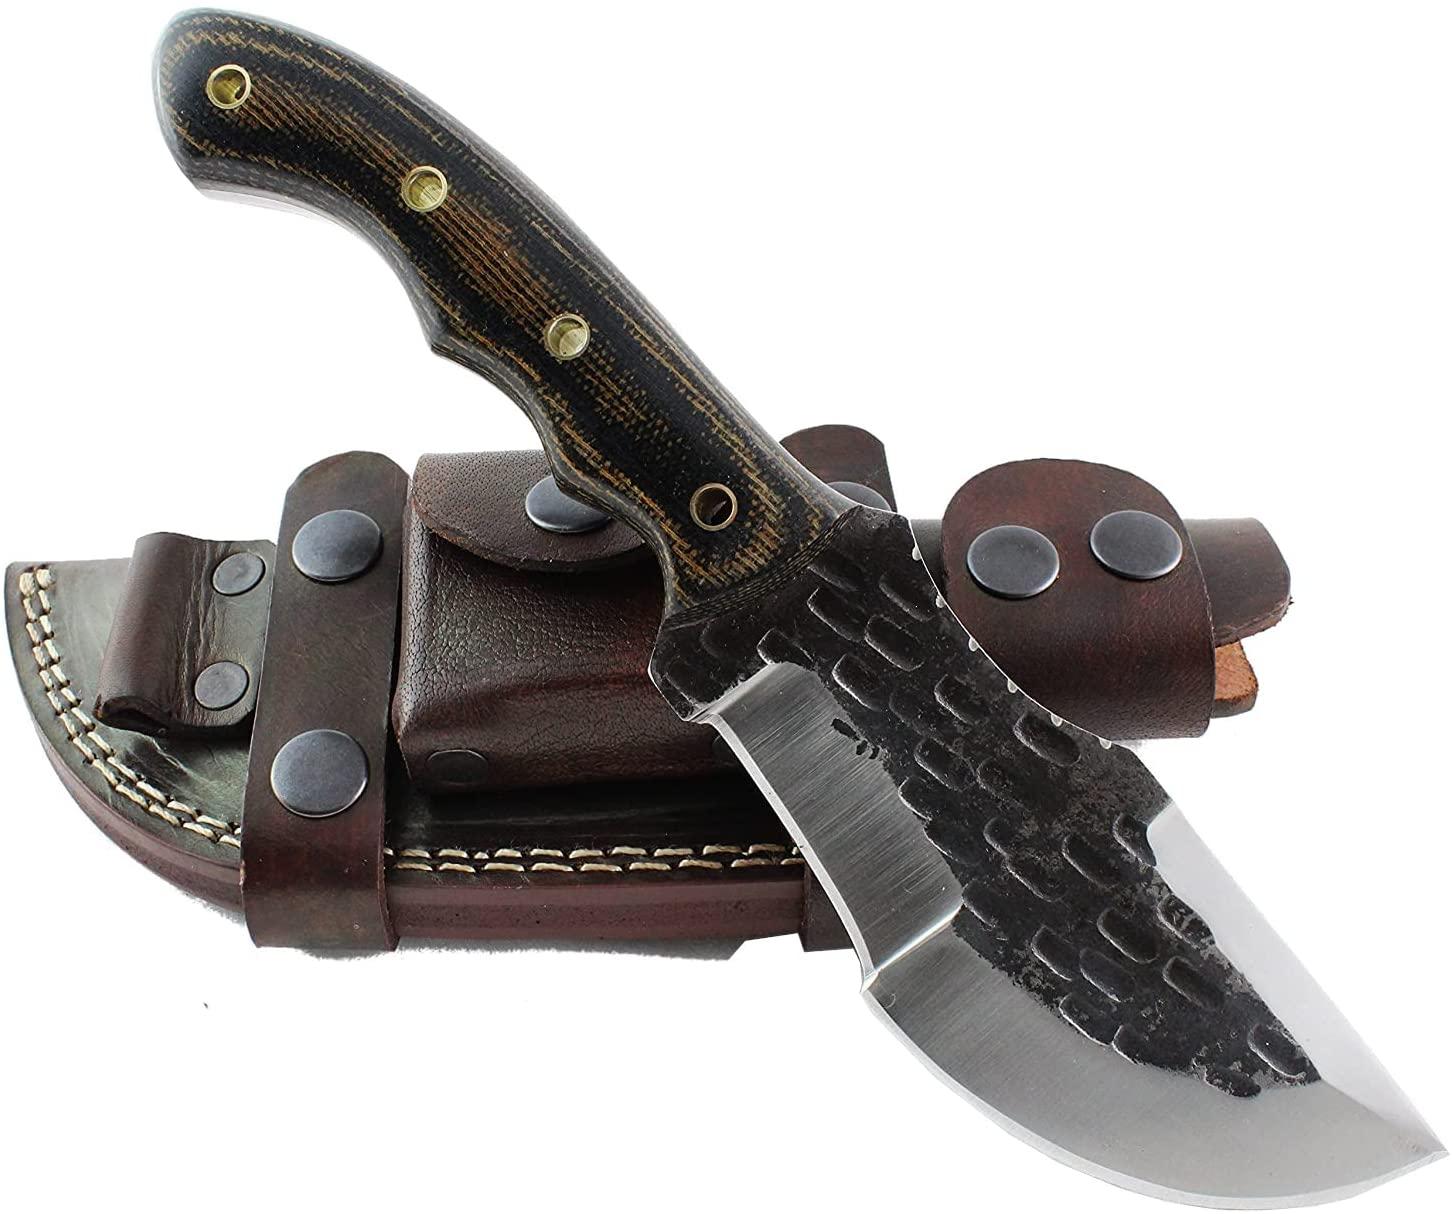 Brown & Black G10 Tracker with Leather Sheath